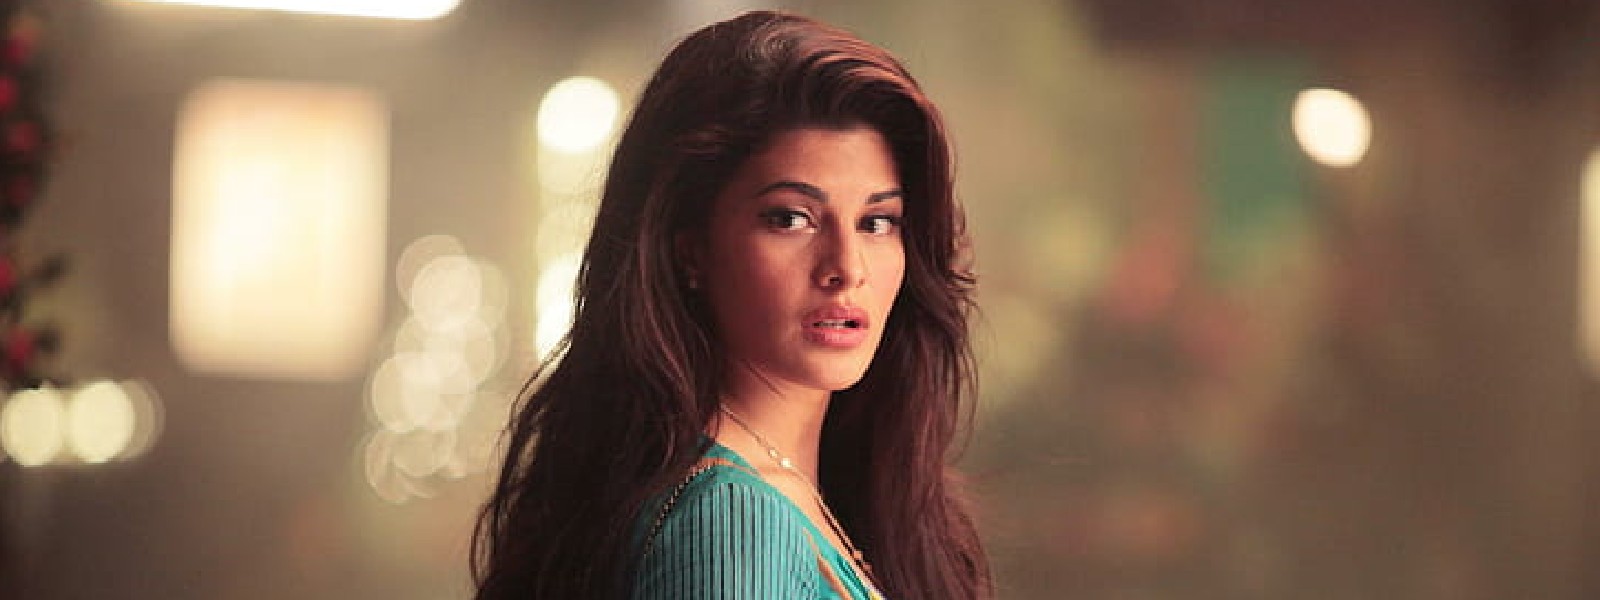 Jacqueline Fernandez Knew Of Conman’s Cases, Enjoyed Gifts: Probe Agency